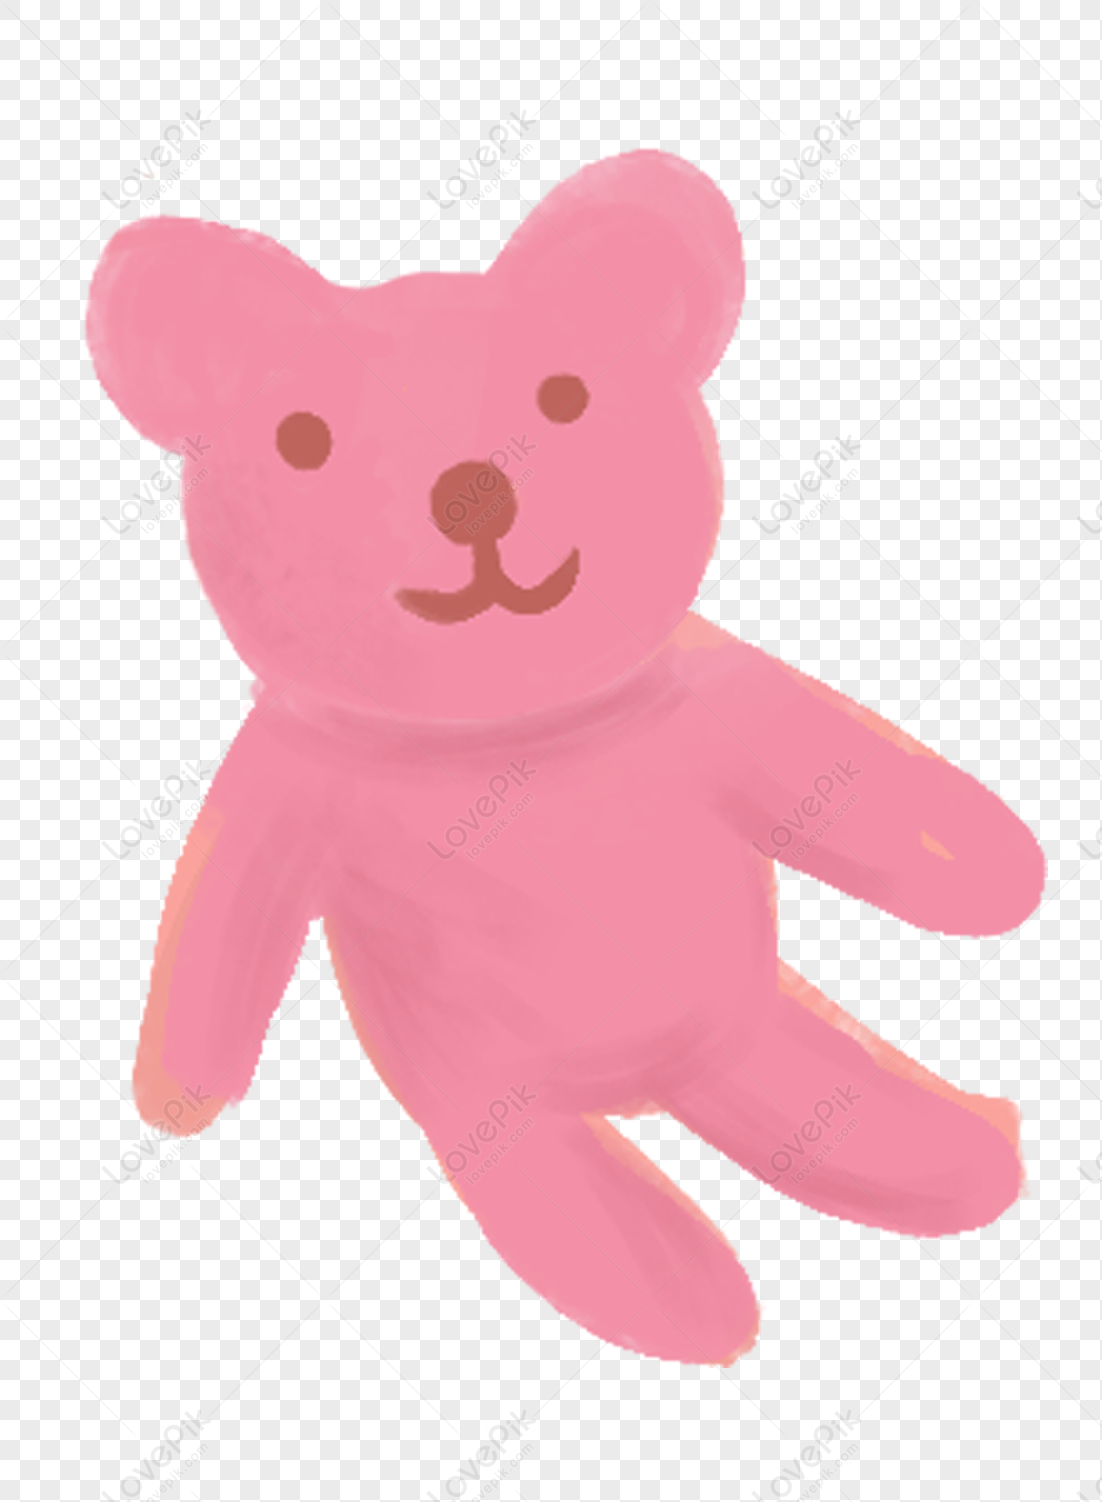 A Doll Bear PNG Image Free Download And Clipart Image For Free ...